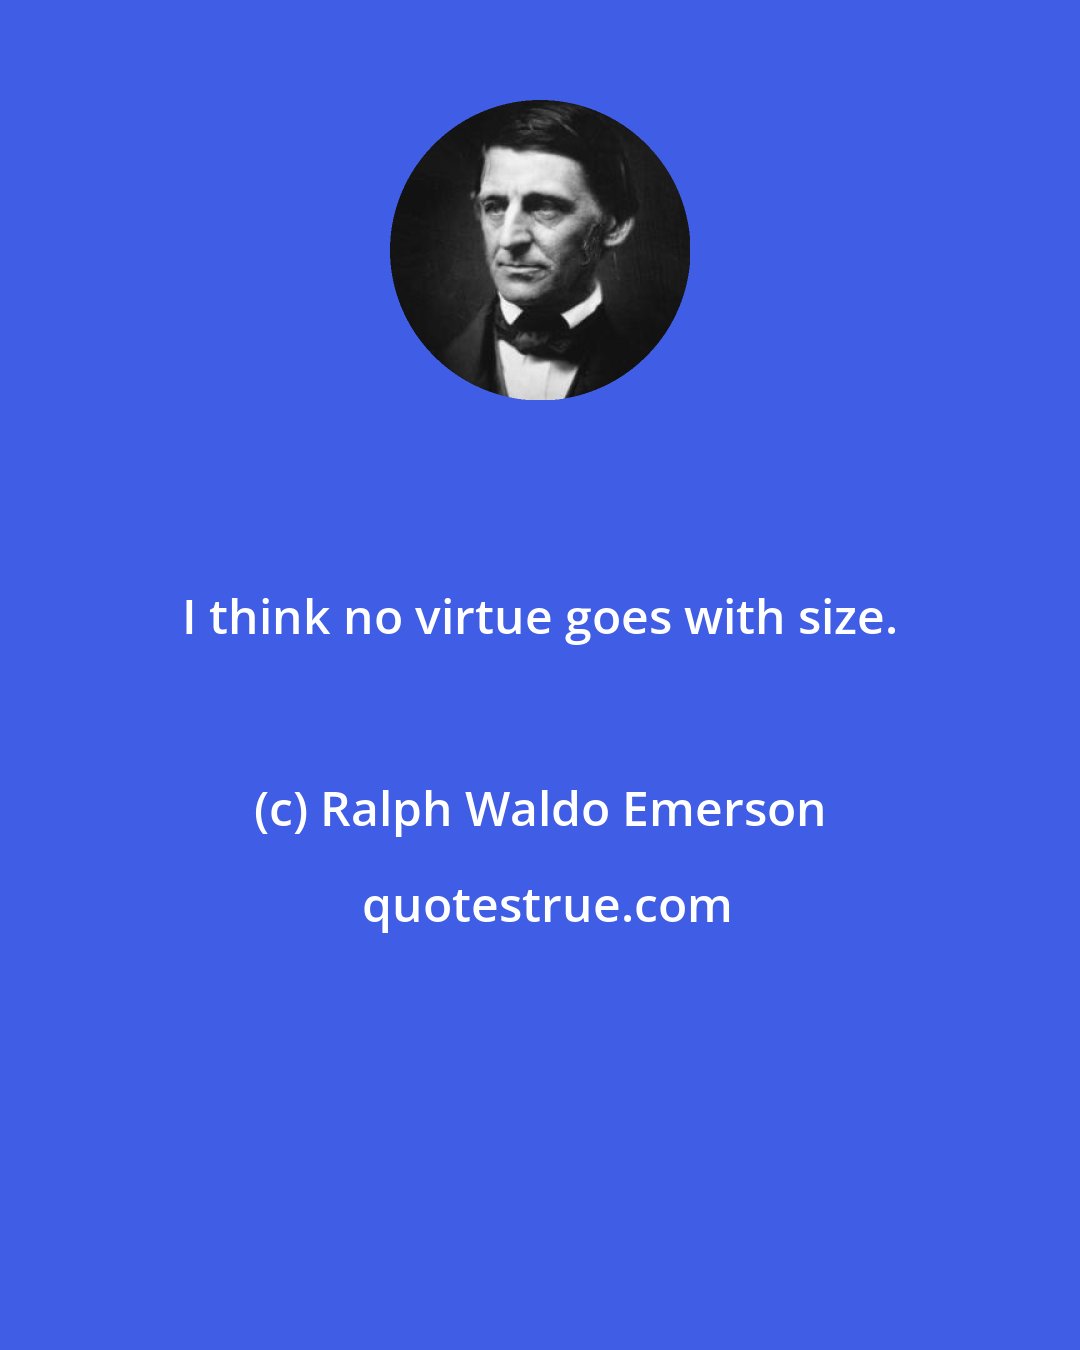 Ralph Waldo Emerson: I think no virtue goes with size.